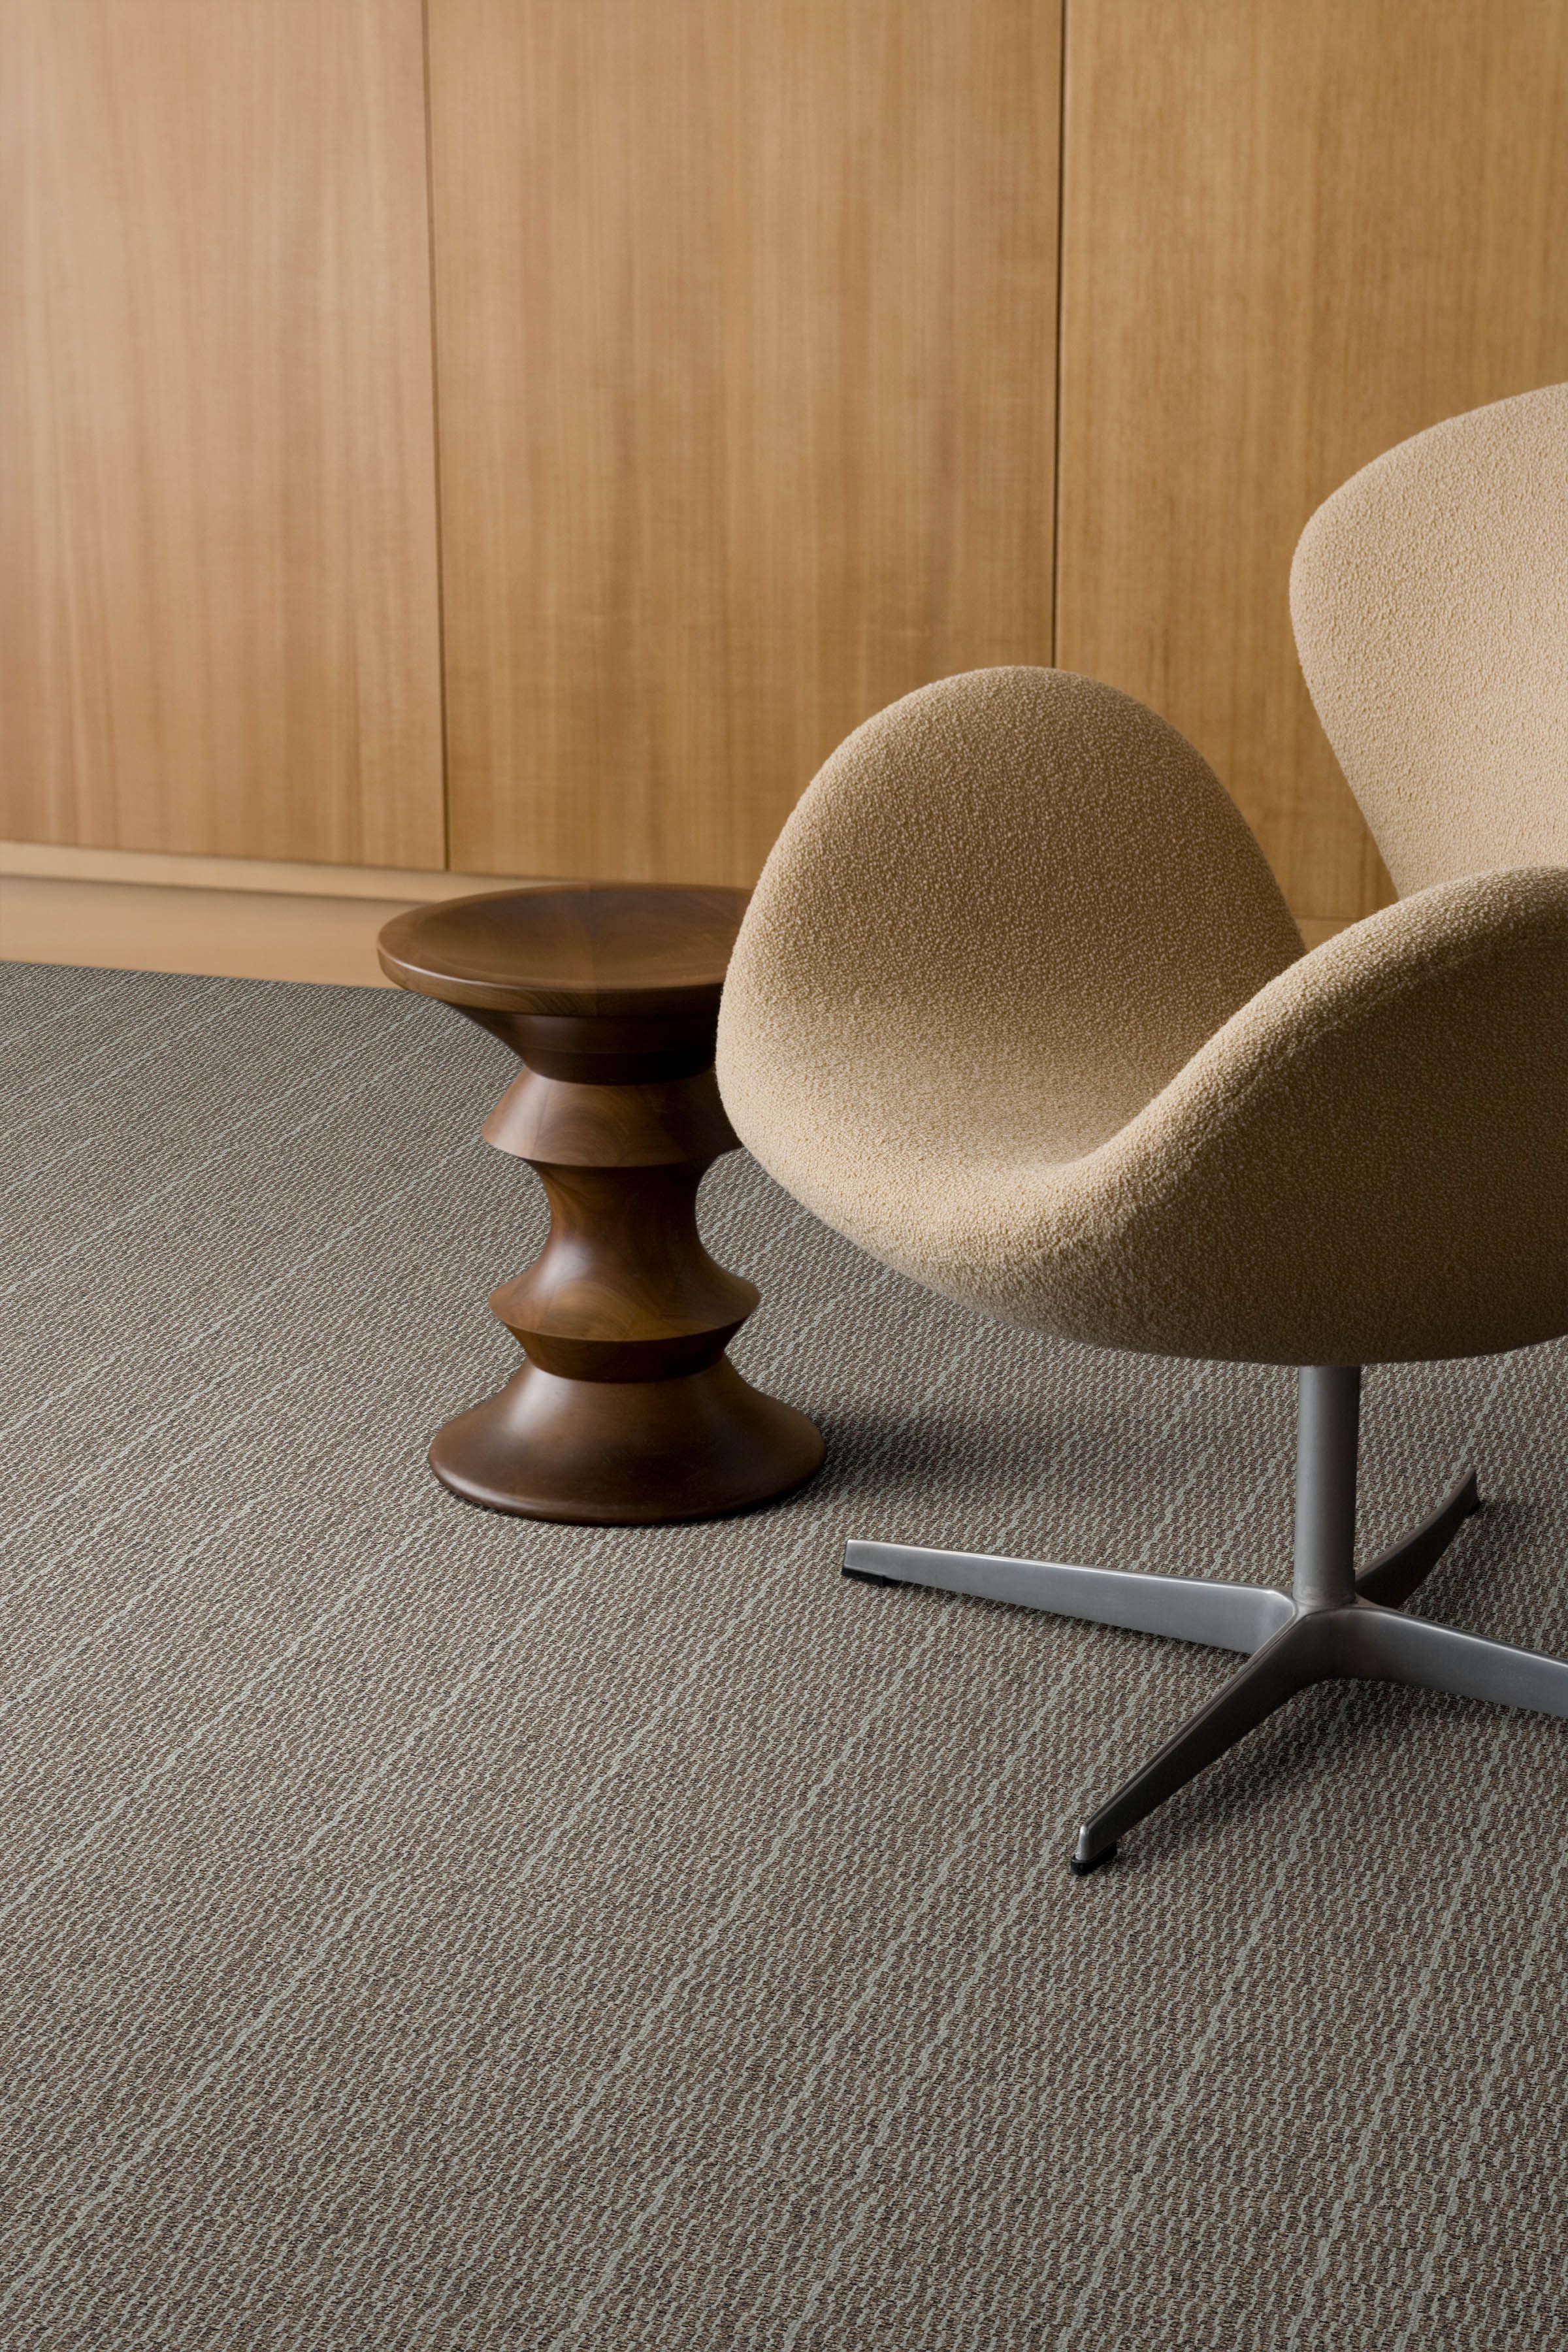 Detail of Interface Tangled & Taut carpet tile with chair and Eames stool imagen número 5